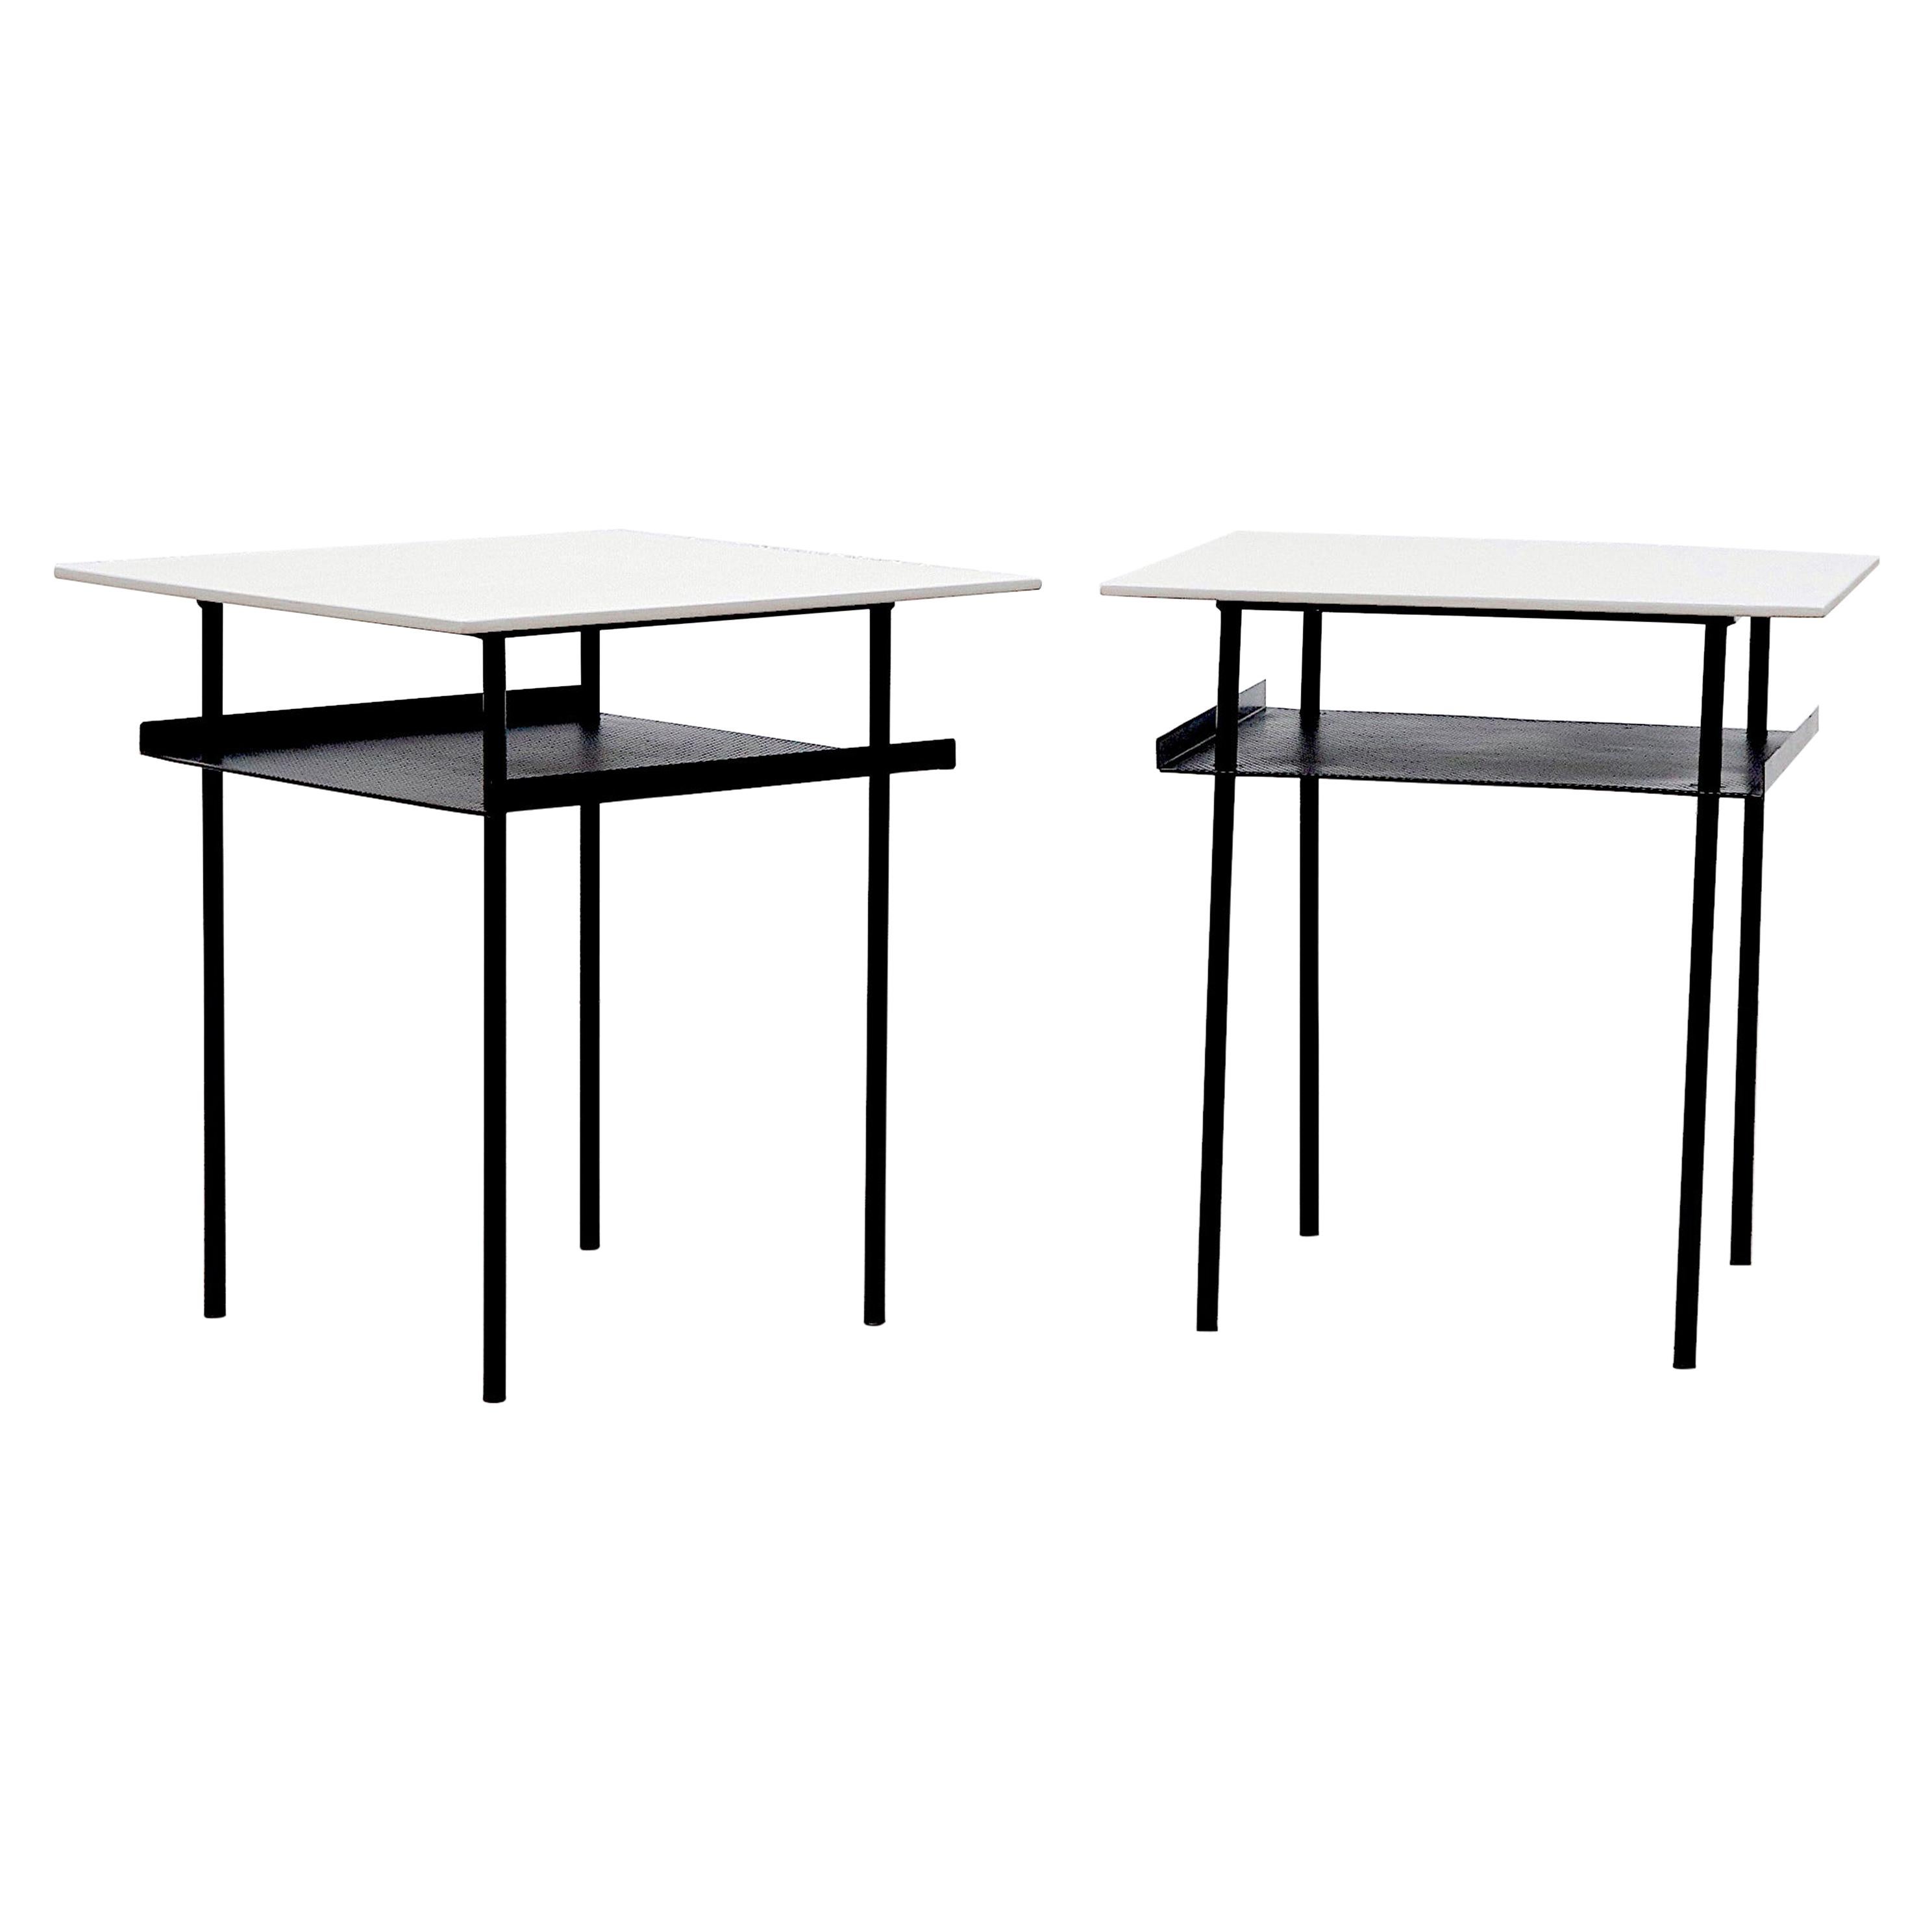 Pair of Wim Rietveld Industrial Side Tables for Auping